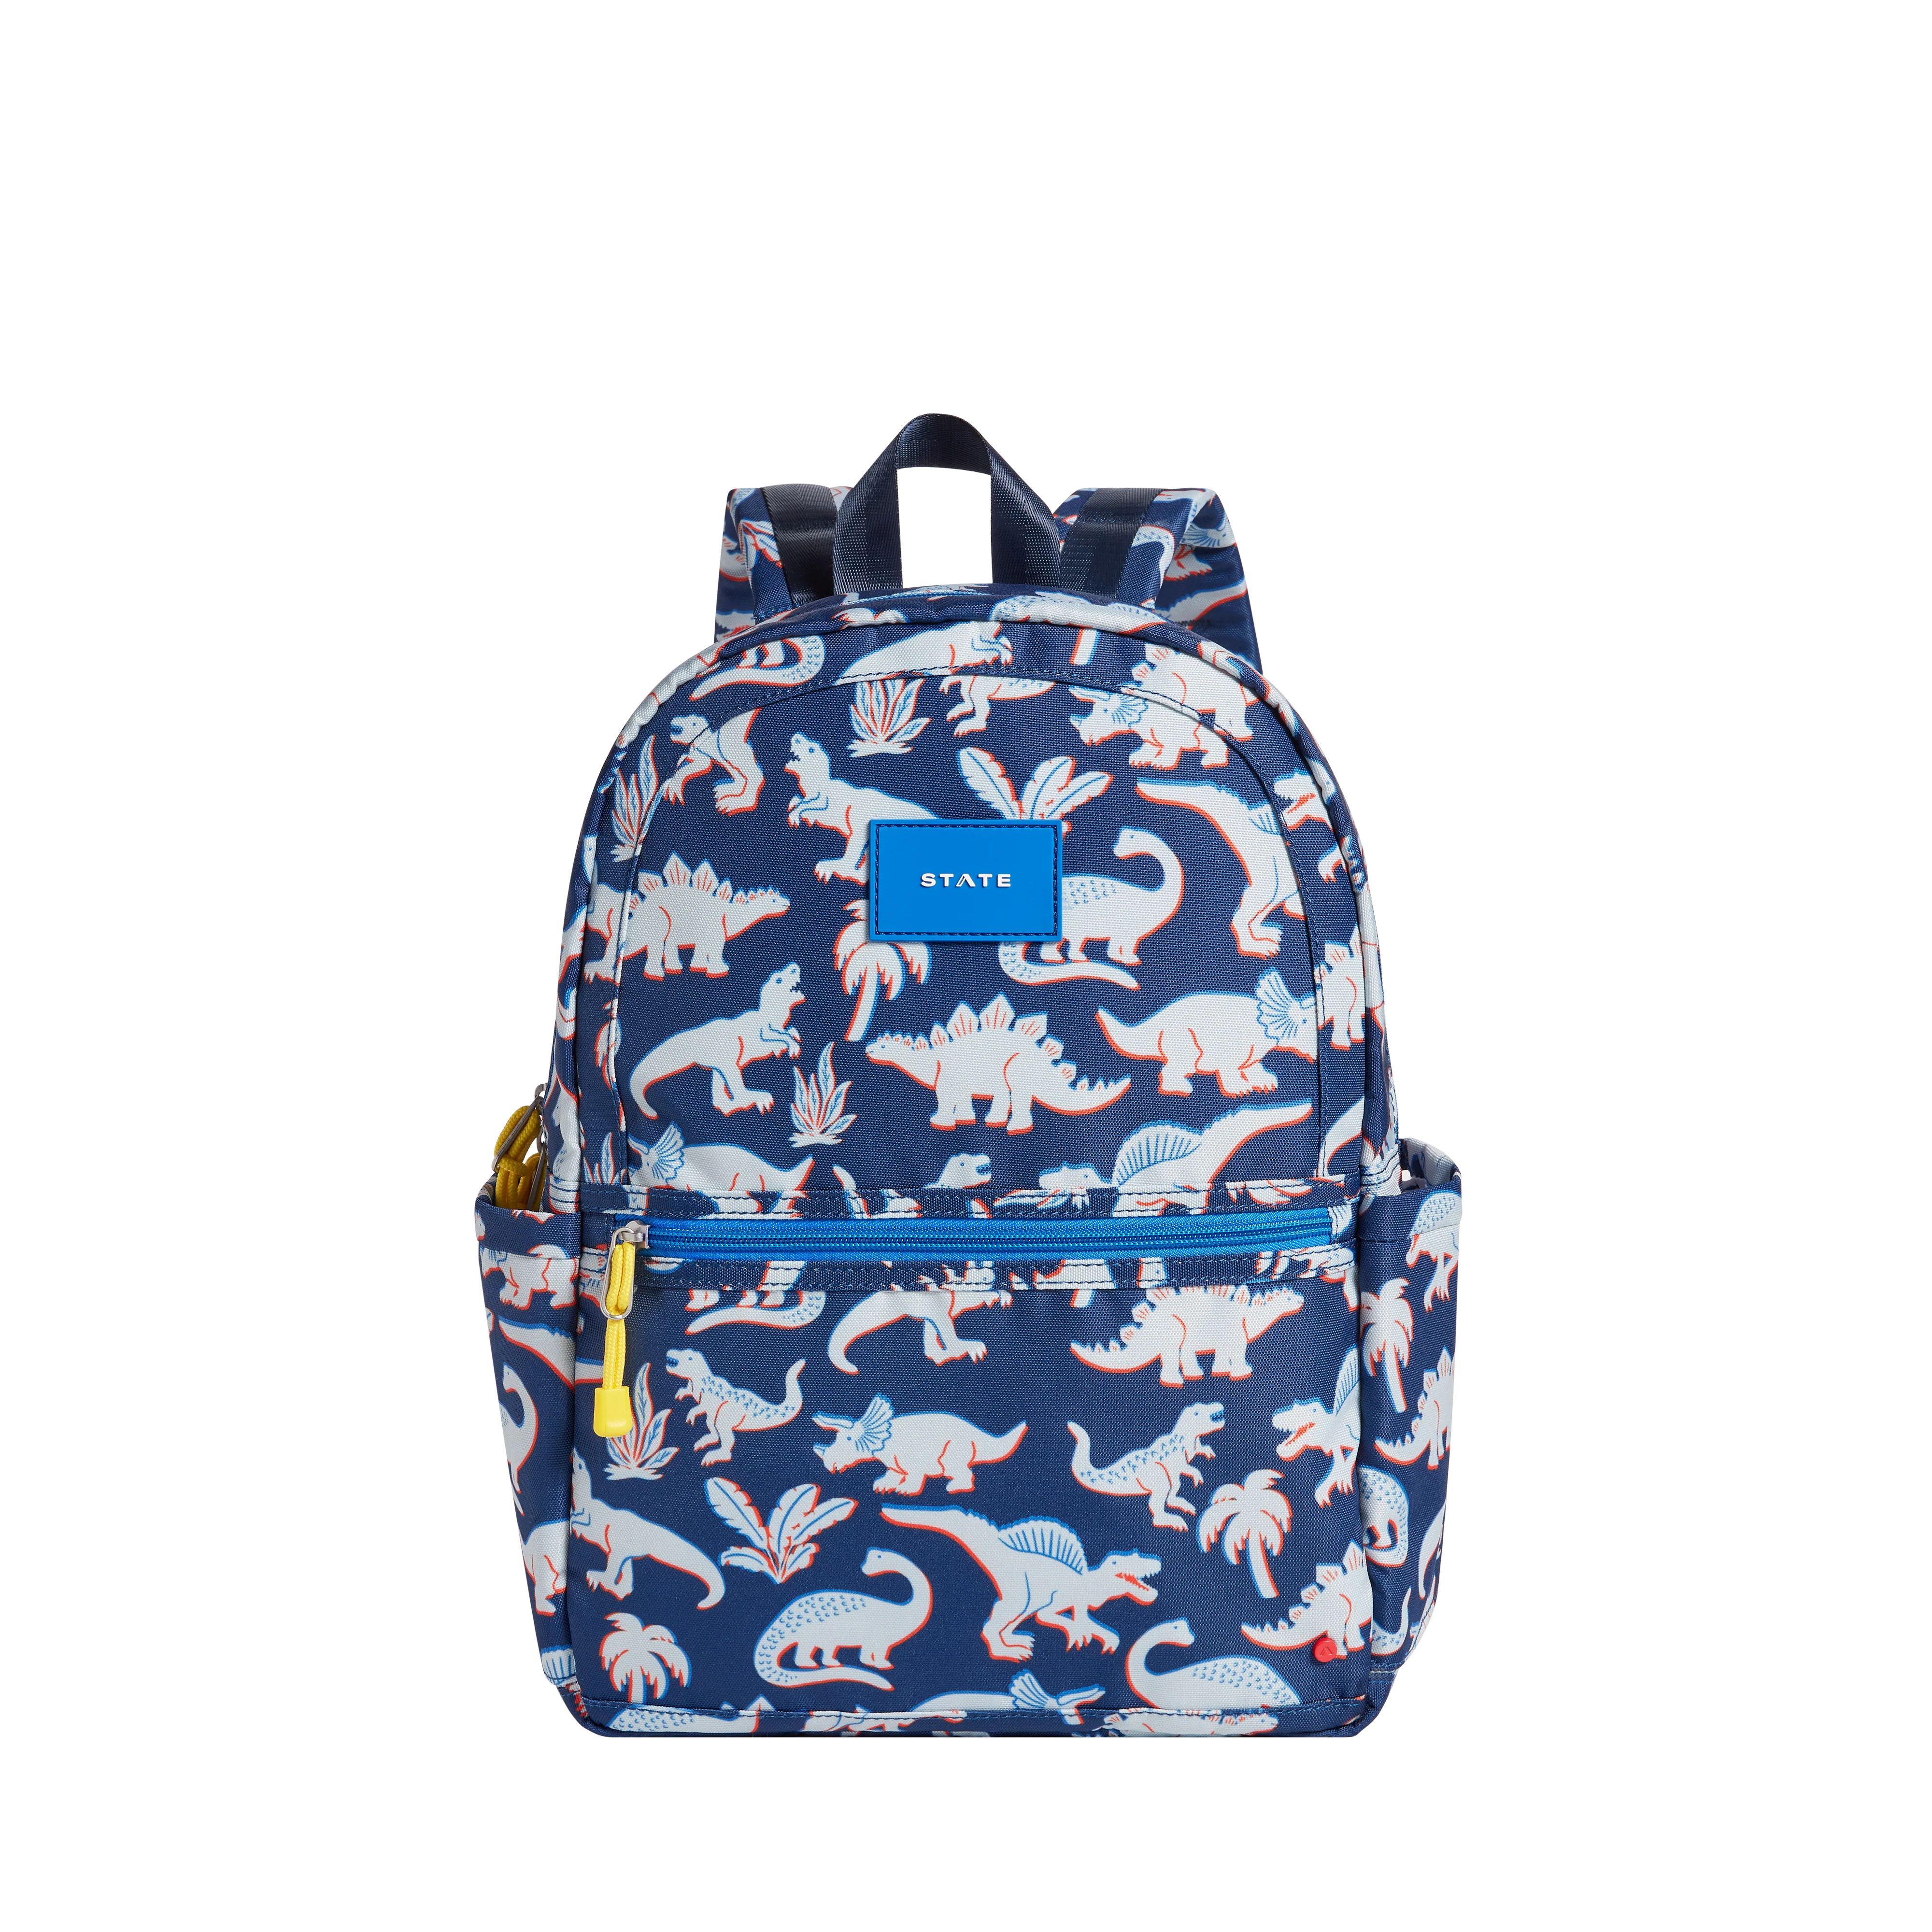 STATE Bags | Kane Kids Backpack Recycled Polyester Canvas Navy Dino | STATE Bags